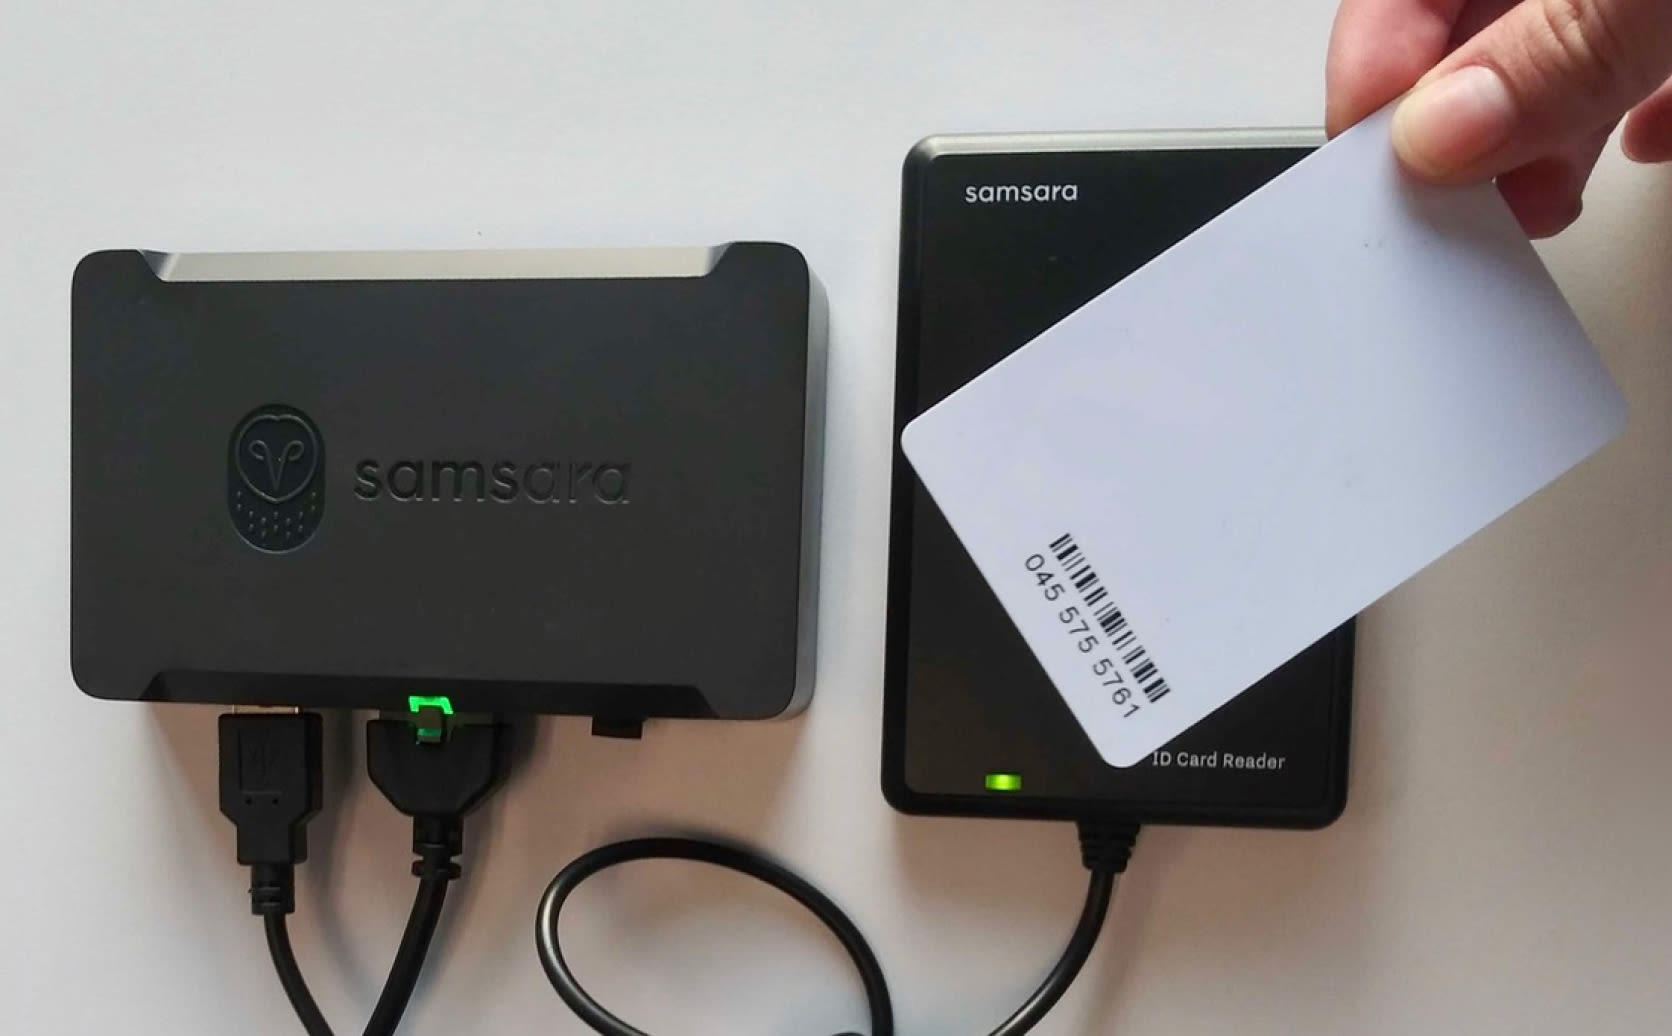 Samsara NFC hardware reader mocked up next to person holding smartphone connecting bluetooth device.